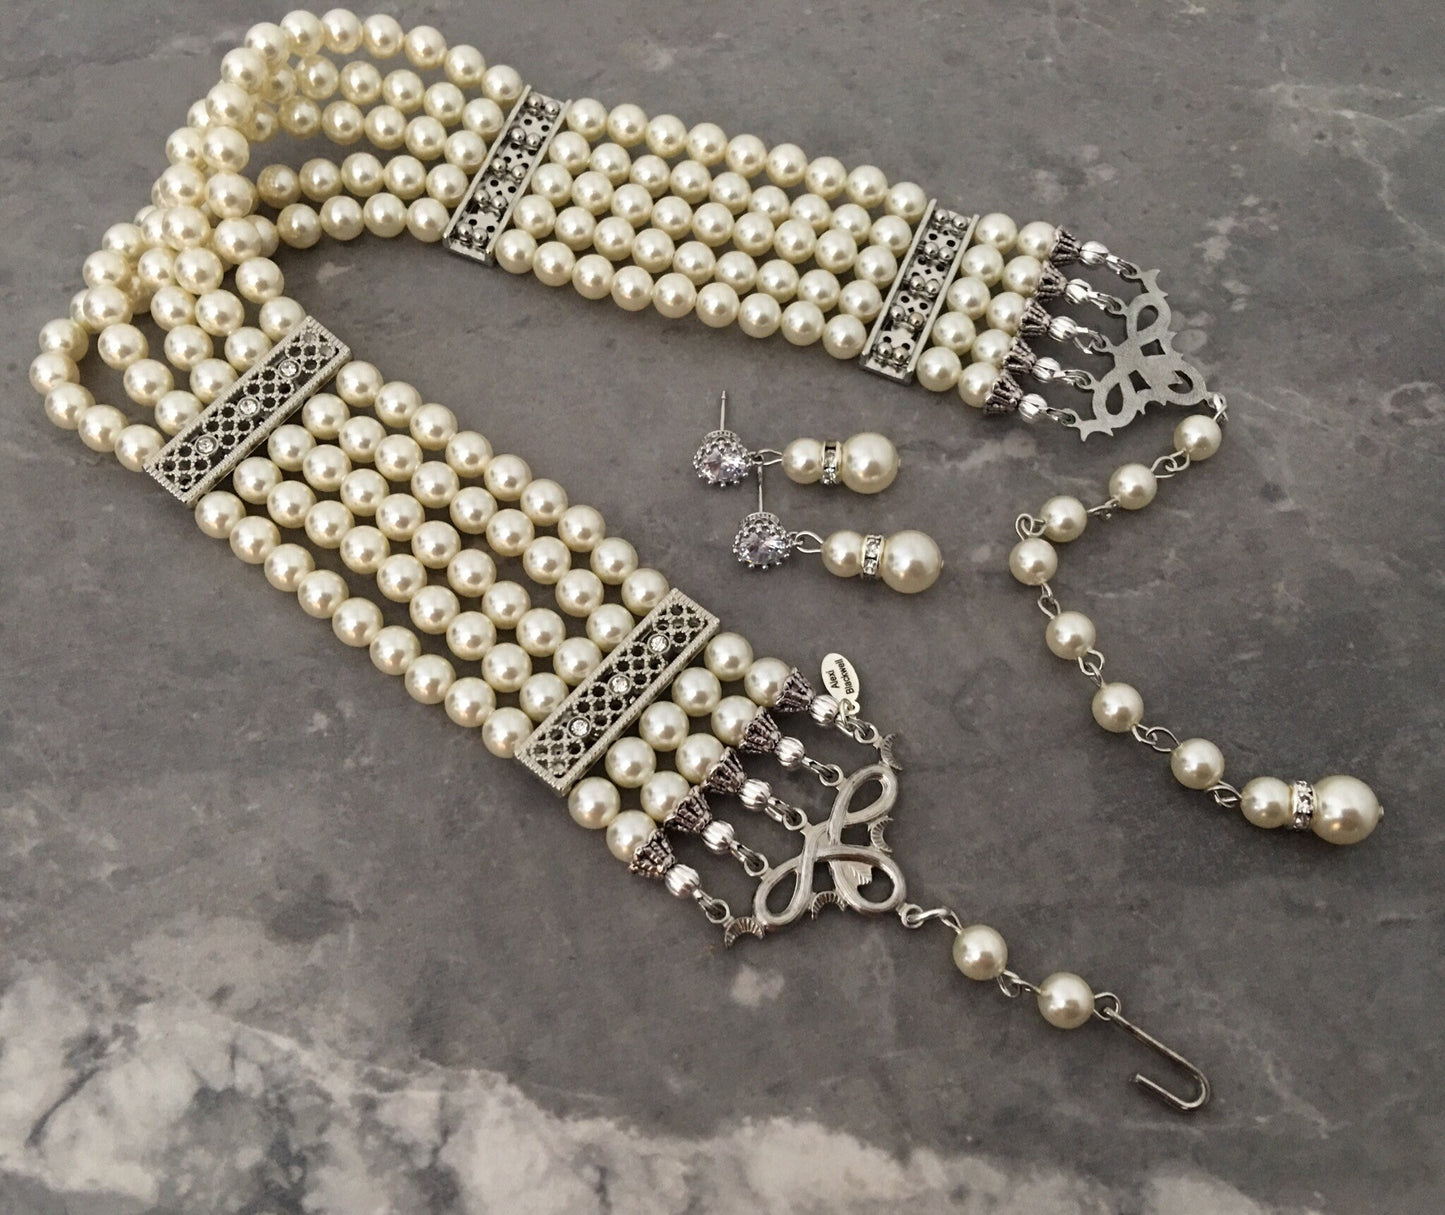 Wedding Choker Pearl Necklace with backdrop 5 multi strand glass Pearls in Cream Ivory White or your choice of color Art Deco Gatsby